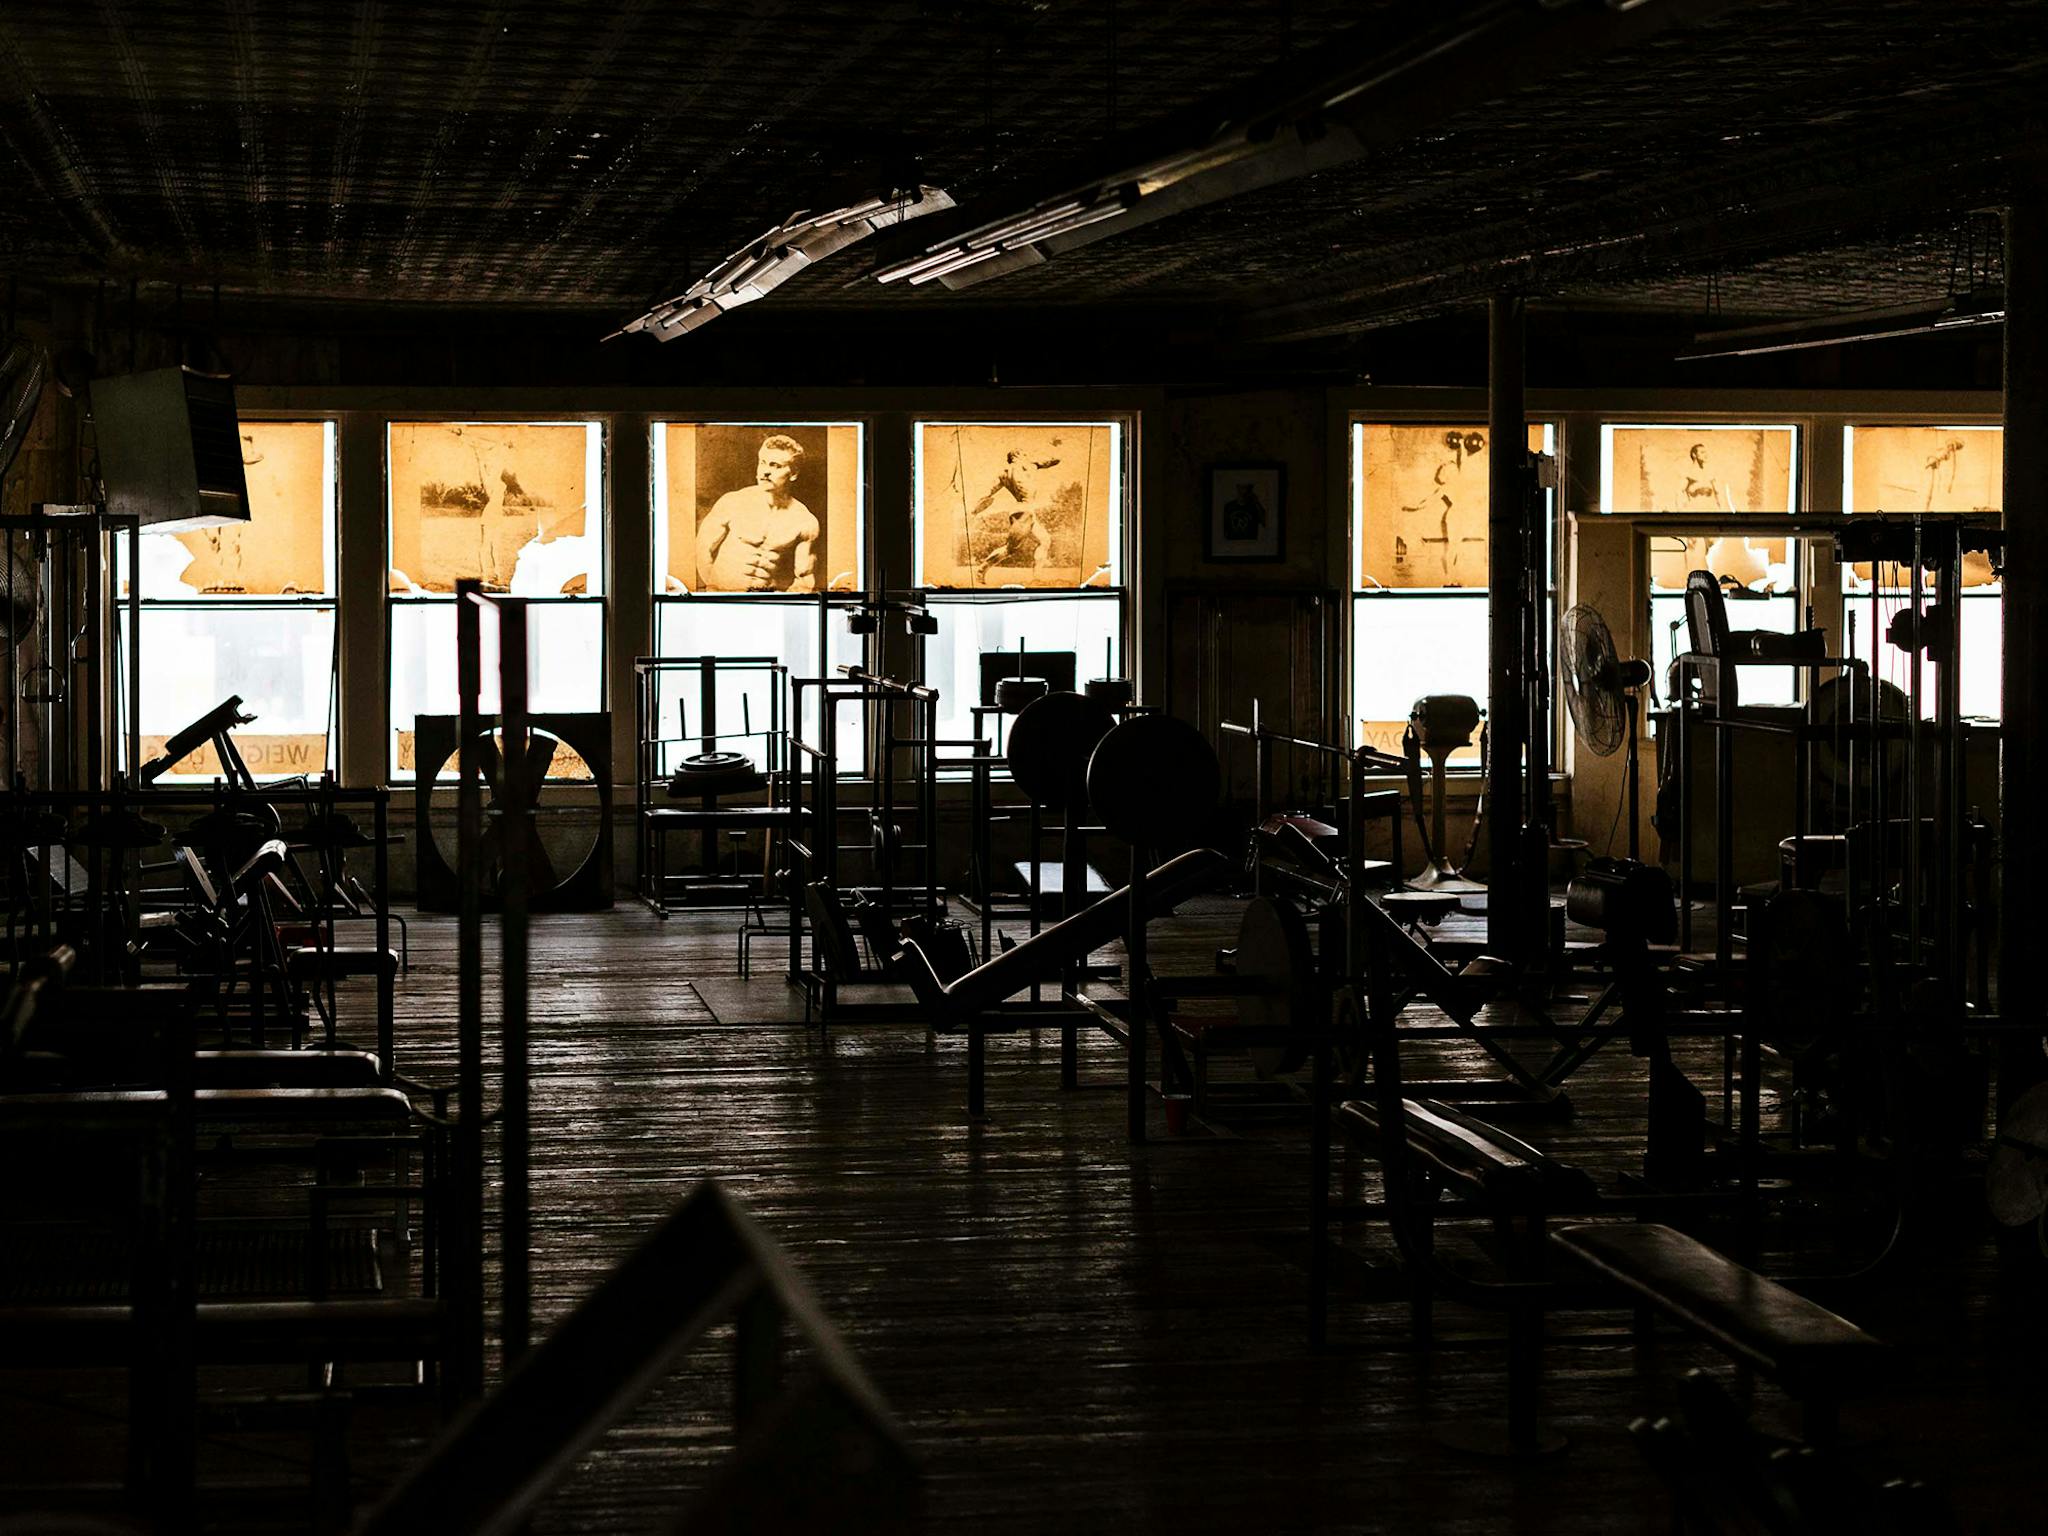 Even during peak times, the gym rarely had more than 15 or 20 people in it, but when it was empty, it took on an entirely different mood. With the fluorescents off and the sun backlighting the yellowed posters that served as window treatments, you can make out the rough flooring (“you wouldn’t walk on that with bare feet,” says Diamond), the almost architectural silhouettes of the equipment, and two fans. Barely visible in the far right window: a vintage vibrating belt once considered a state-of-the-art fat-reducing device.